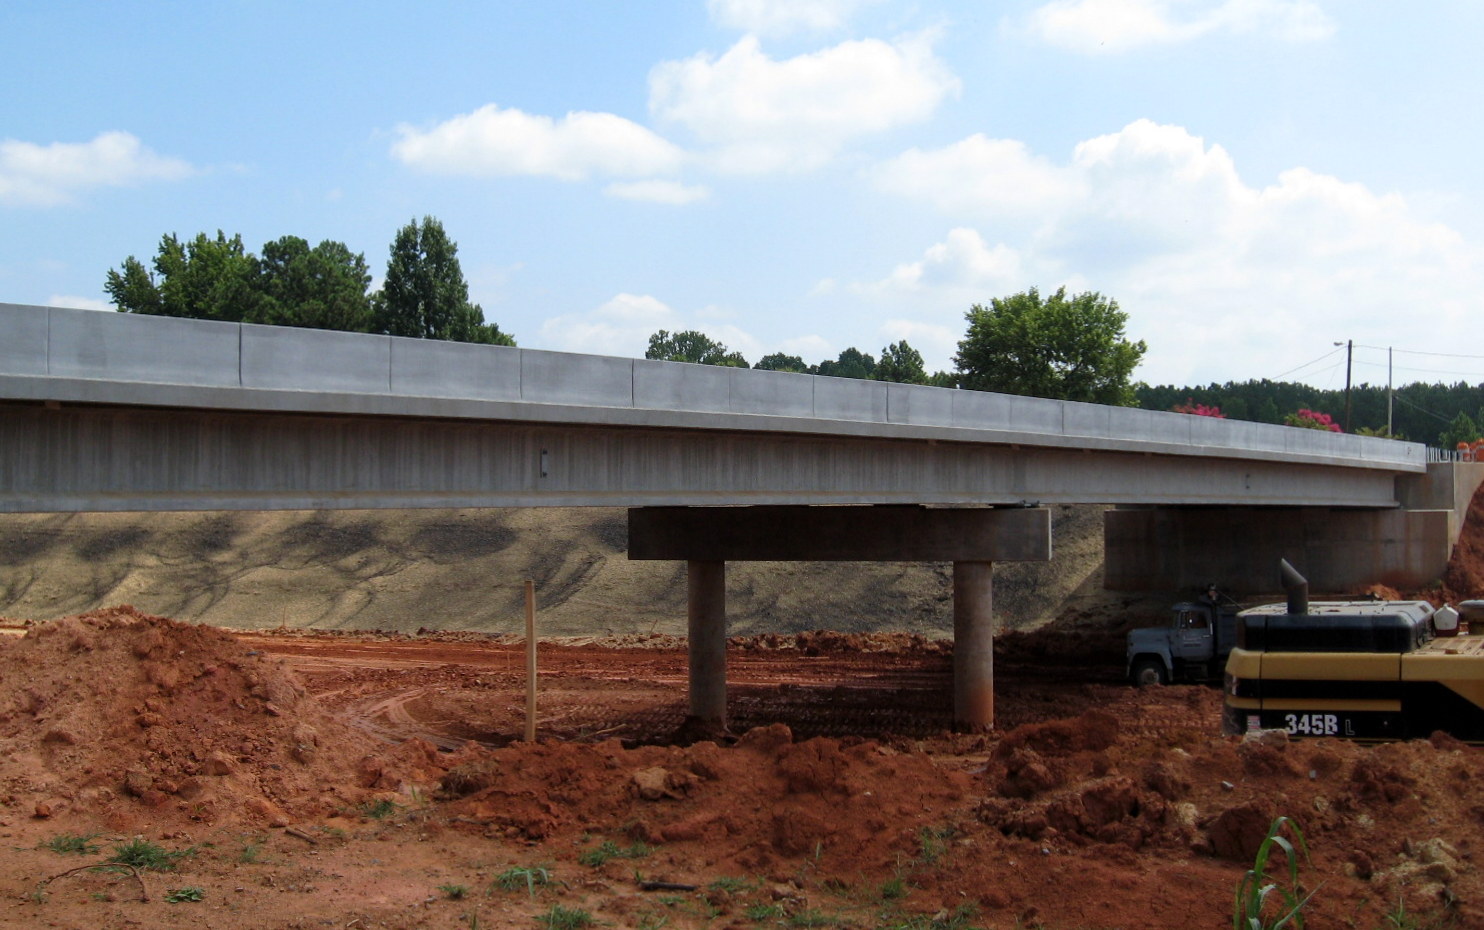 Photo showing progress in removing soil from under completed Walker Mill Rd 
Bridge for future I-74 freeway in Aug. 2012